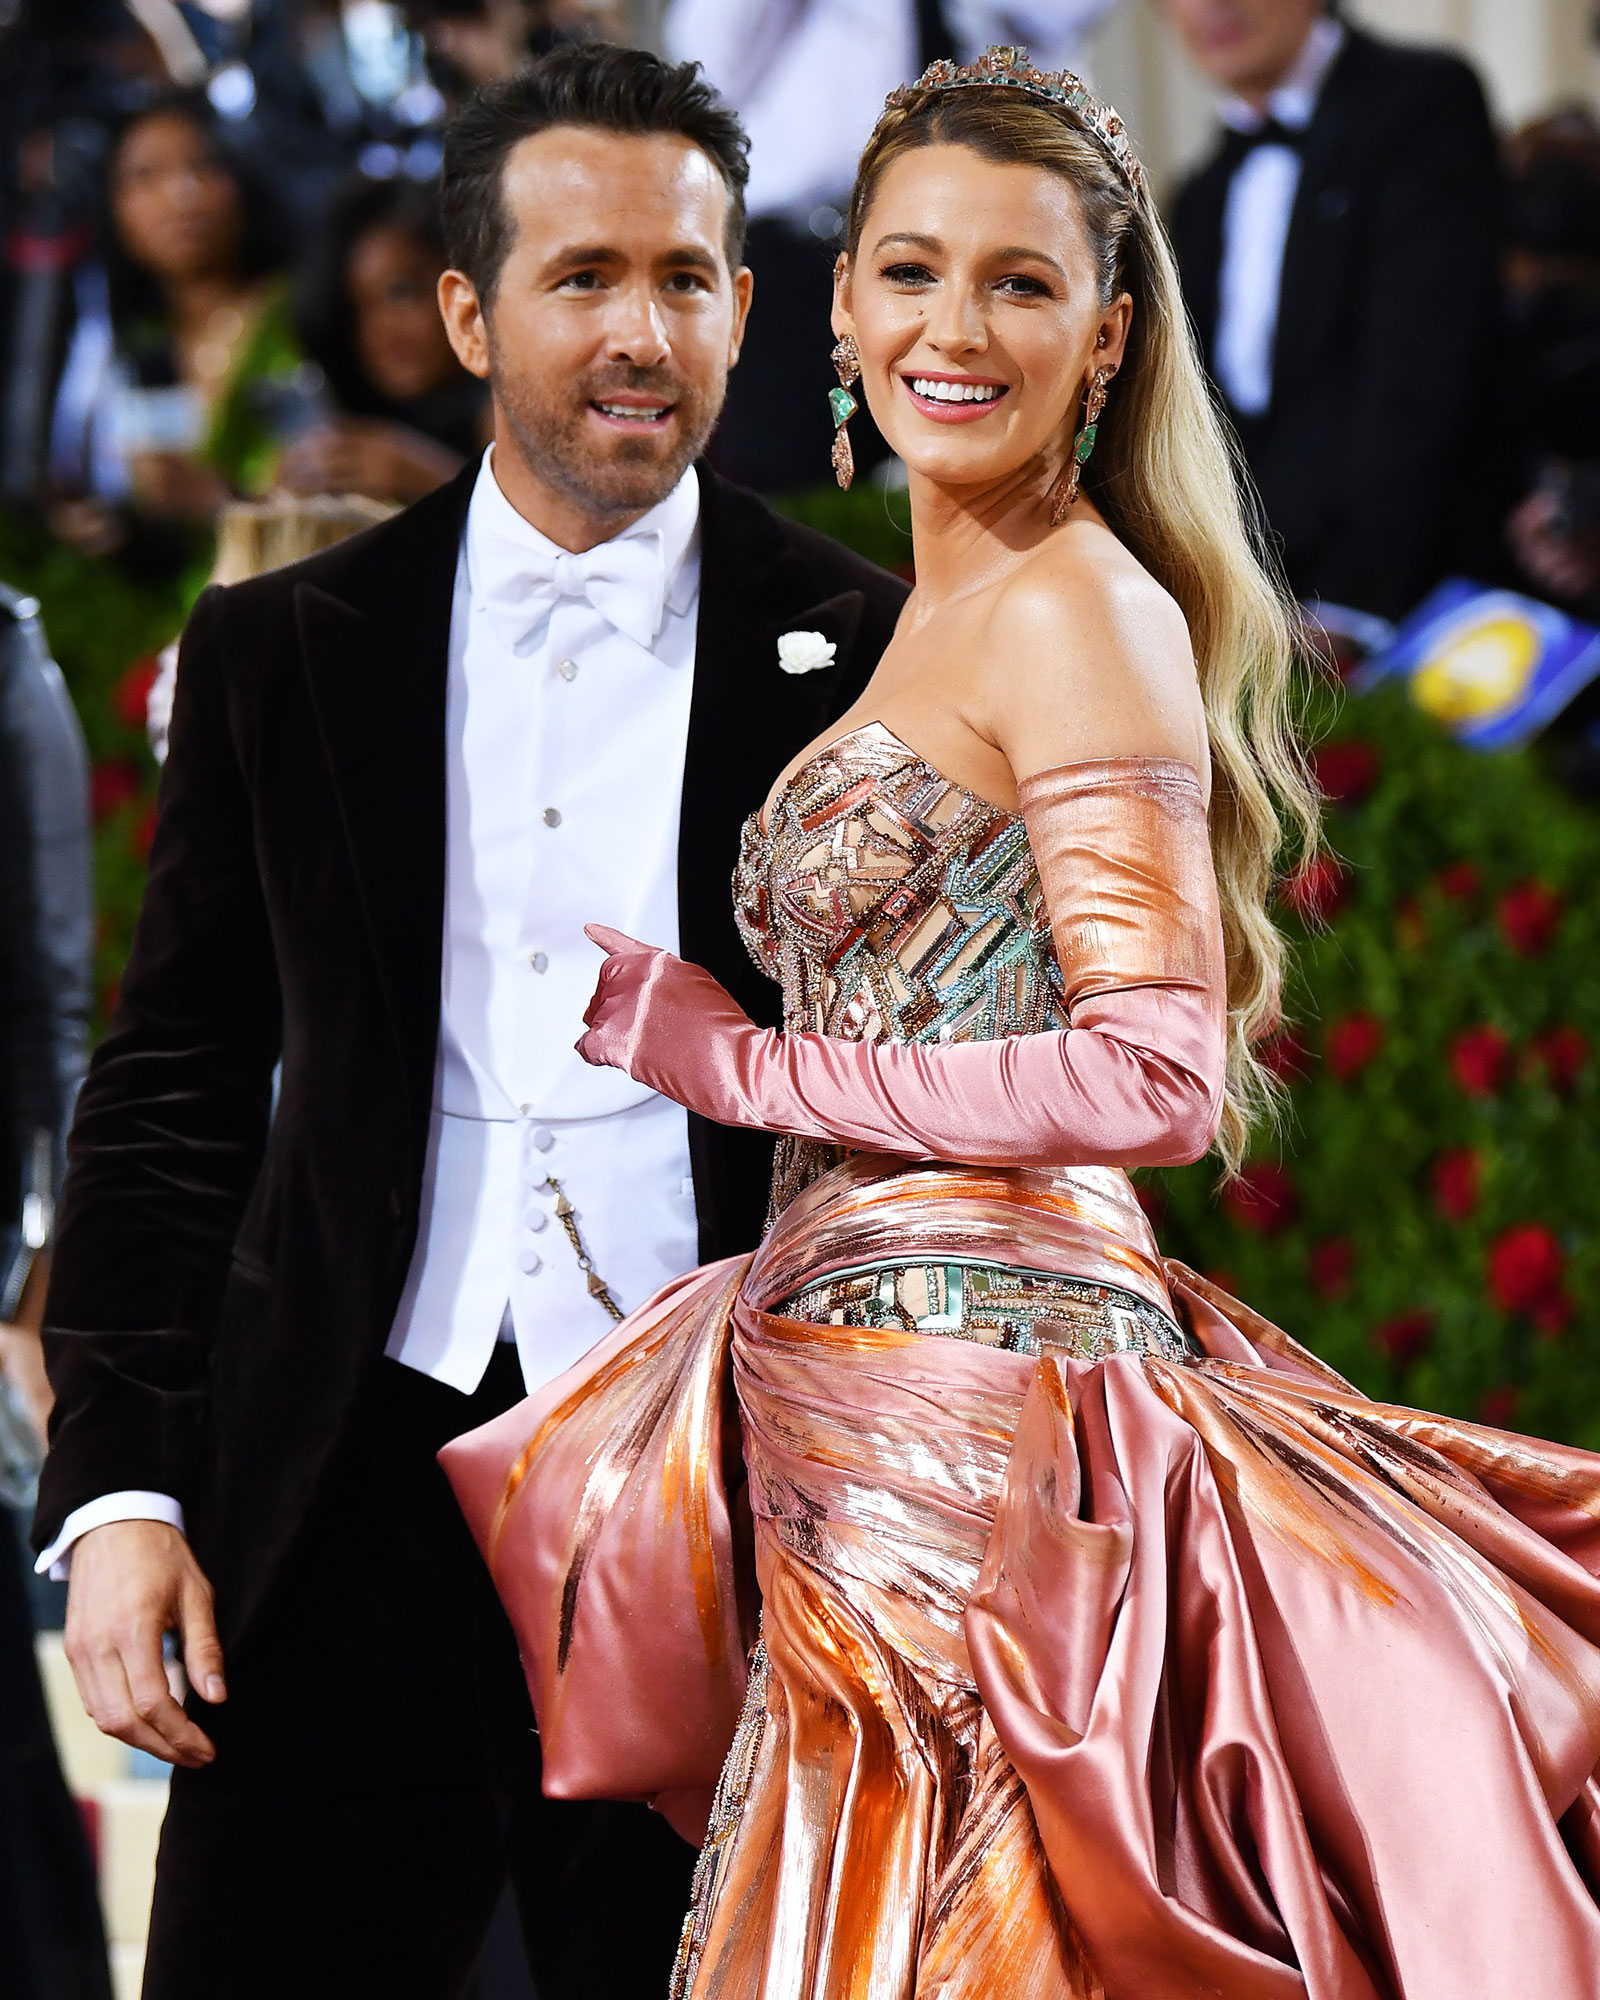 https://www.usmagazine.com/wp-content/uploads/2023/02/Blake-Lively-and-Ryan-Reynolds-Are-%E2%80%98Thrilled-and-%E2%80%98Adjusting-Wonderfully-After-Welcoming-Baby-No.-4-1.jpg?quality=86&strip=all